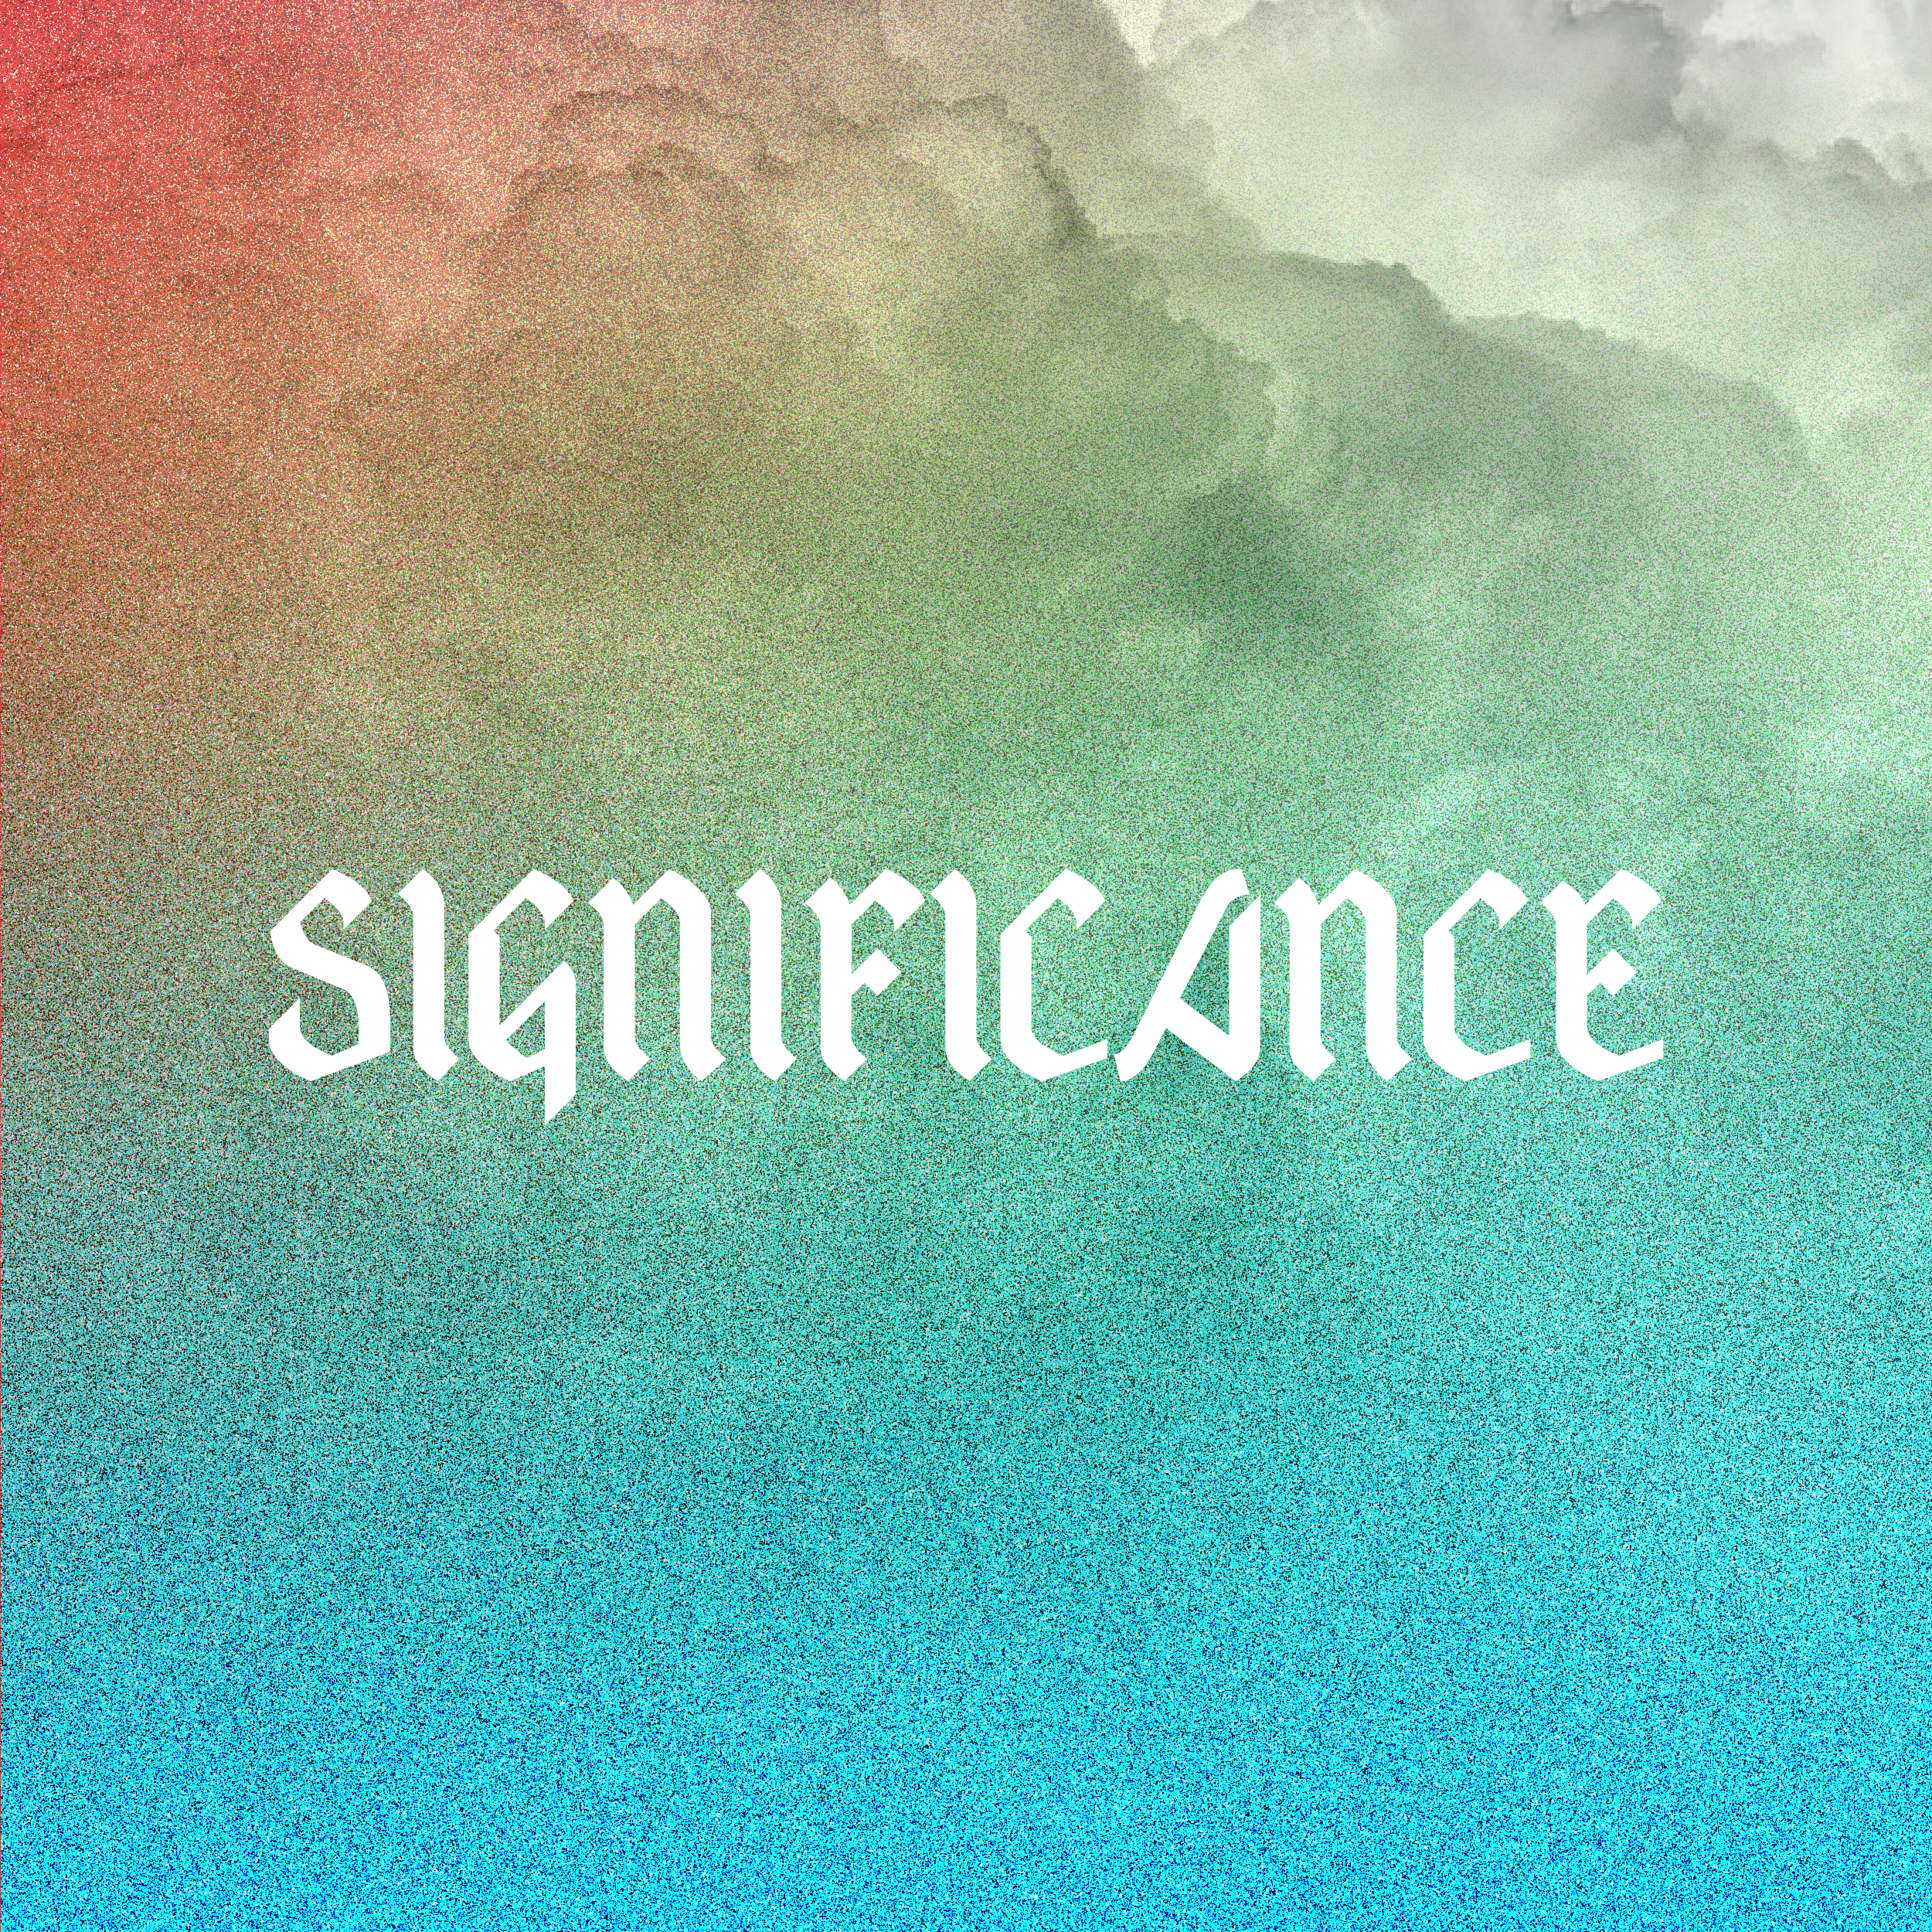 Significance-01.png